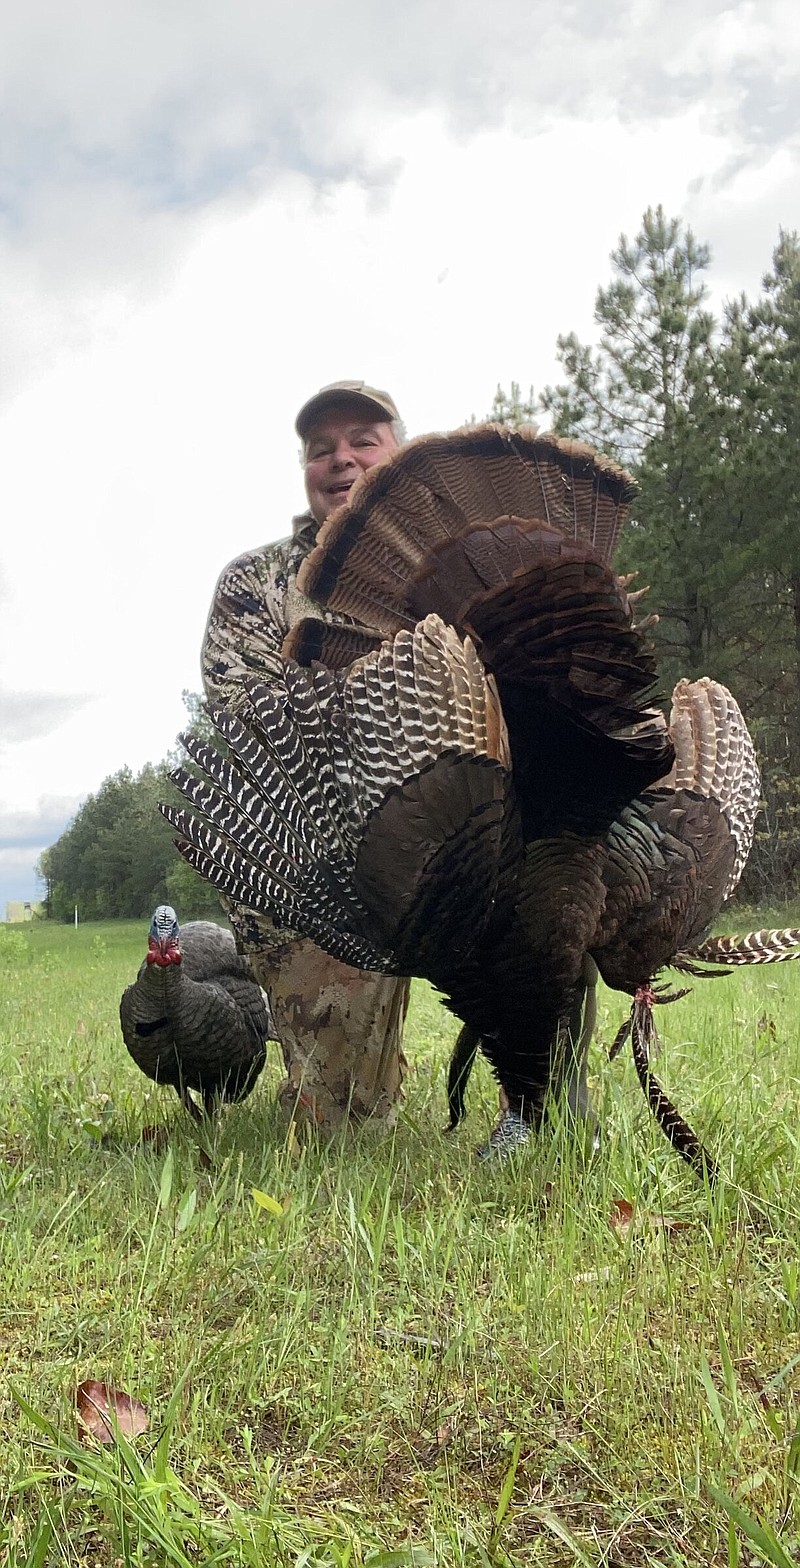 Joe Volpe was elated to bag this gobbler Tuesday on the second day of spring turkey season.
(Photo submitted by Joe Volpe)